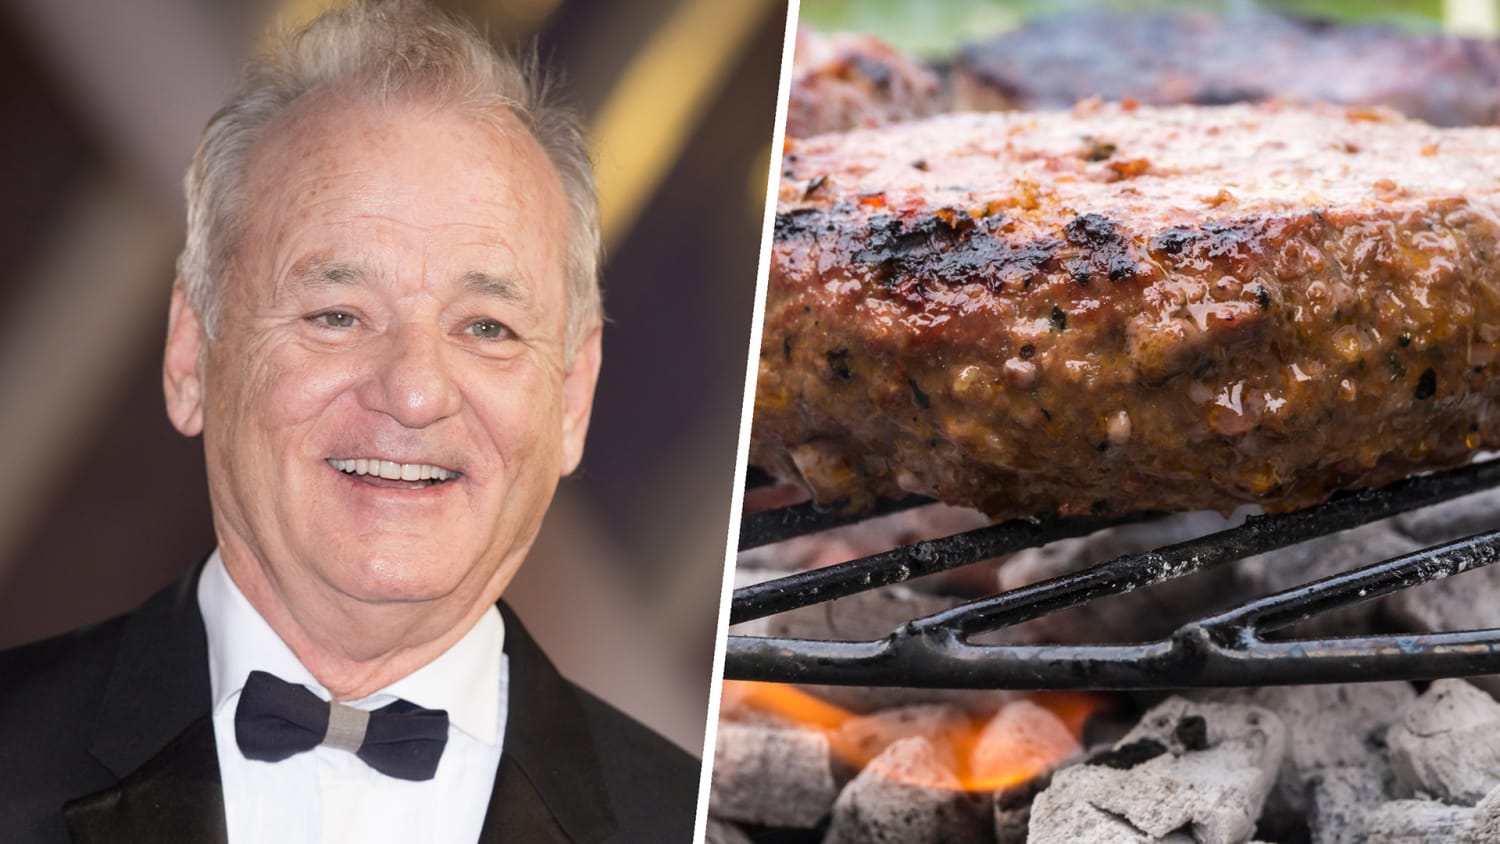 20-somethings invite Bill Murray to play 'generic father figure' at cookout - Today.com